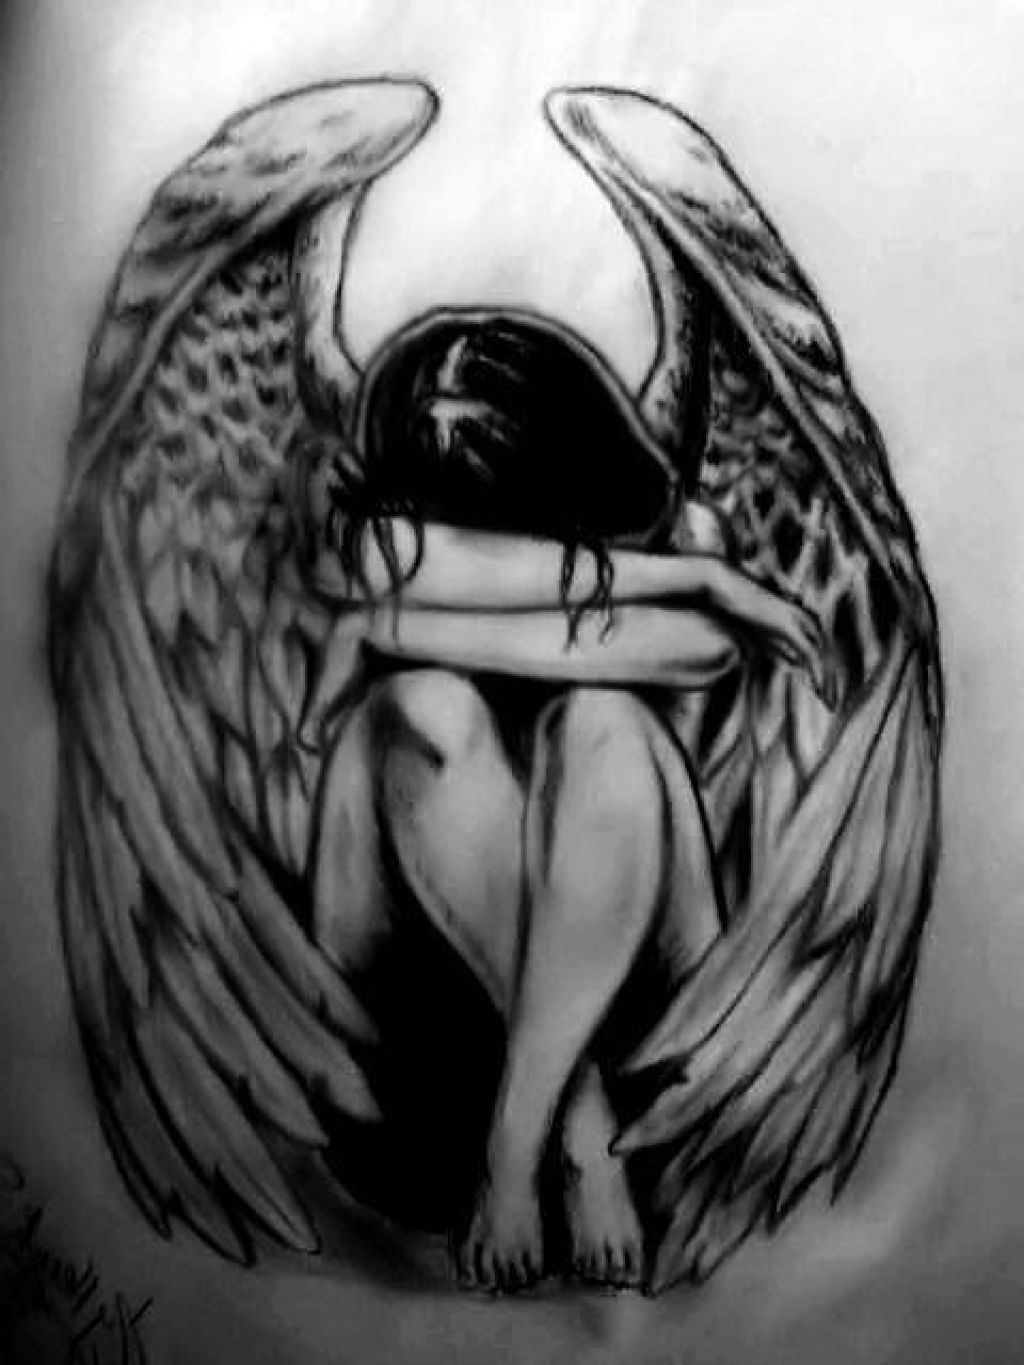 60+ Wonderful Fallen Angel Tattoos & Designs With Meanings